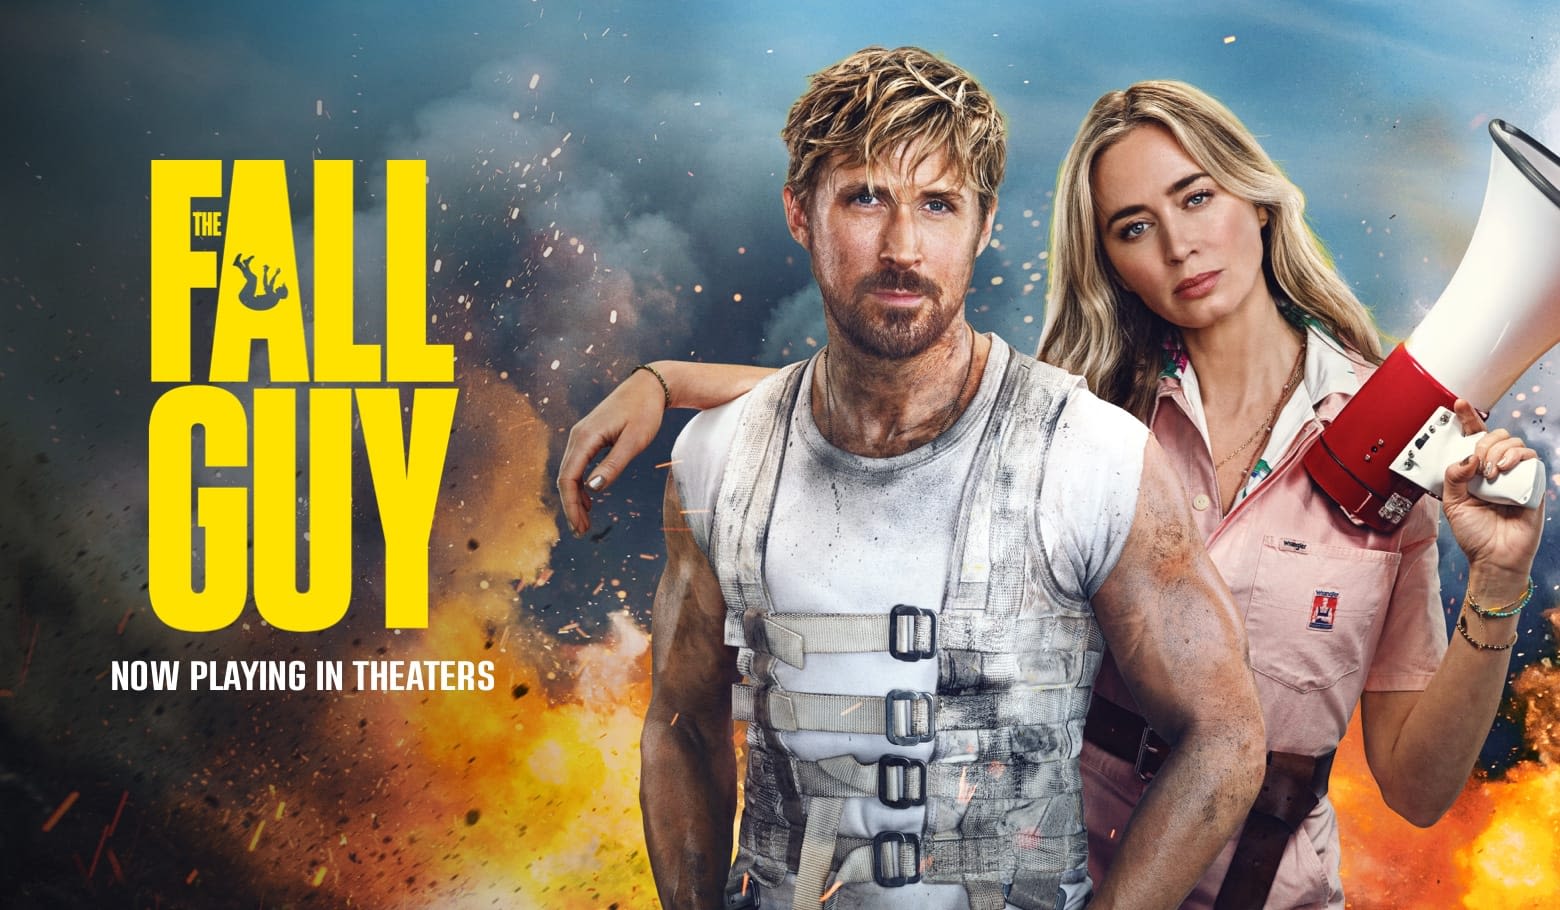 Box Office: "The Fall Guy" Not Connecting with Audiences, Sees $25 Mil Opening Weekend Despite Top Reviews, Solid ...